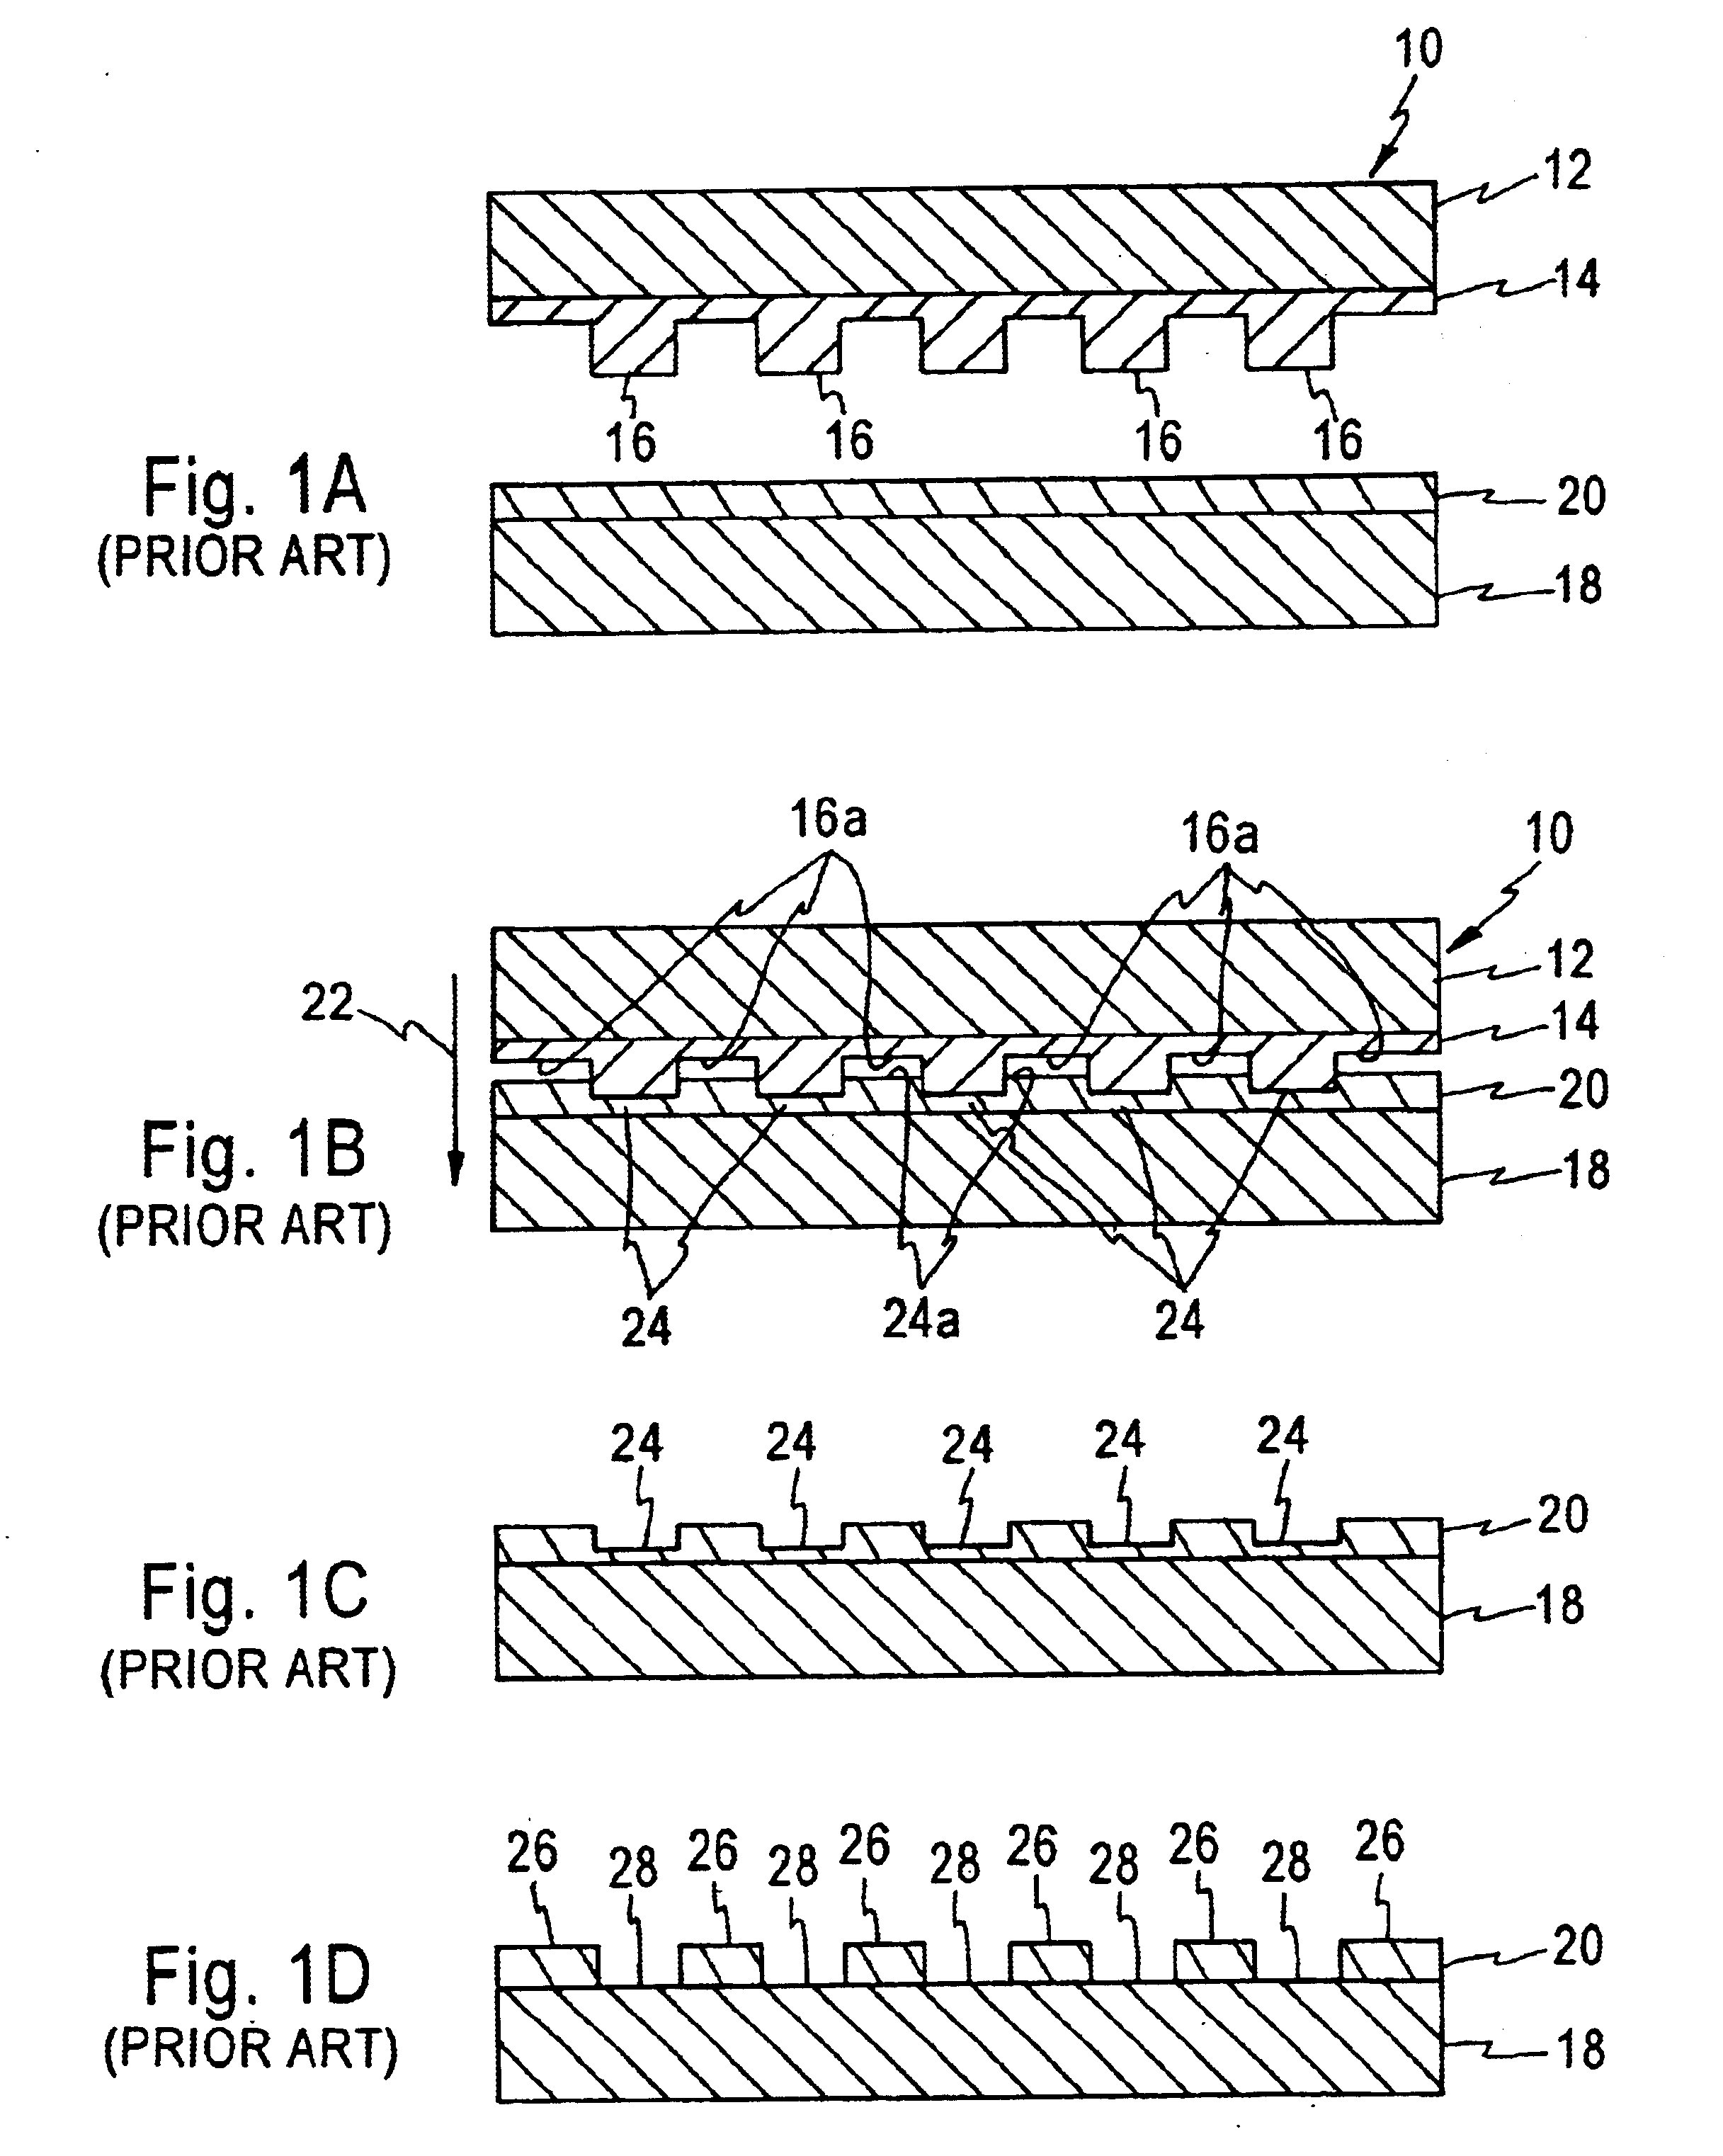 Multi-level stamper for improved thermal imprint lithography